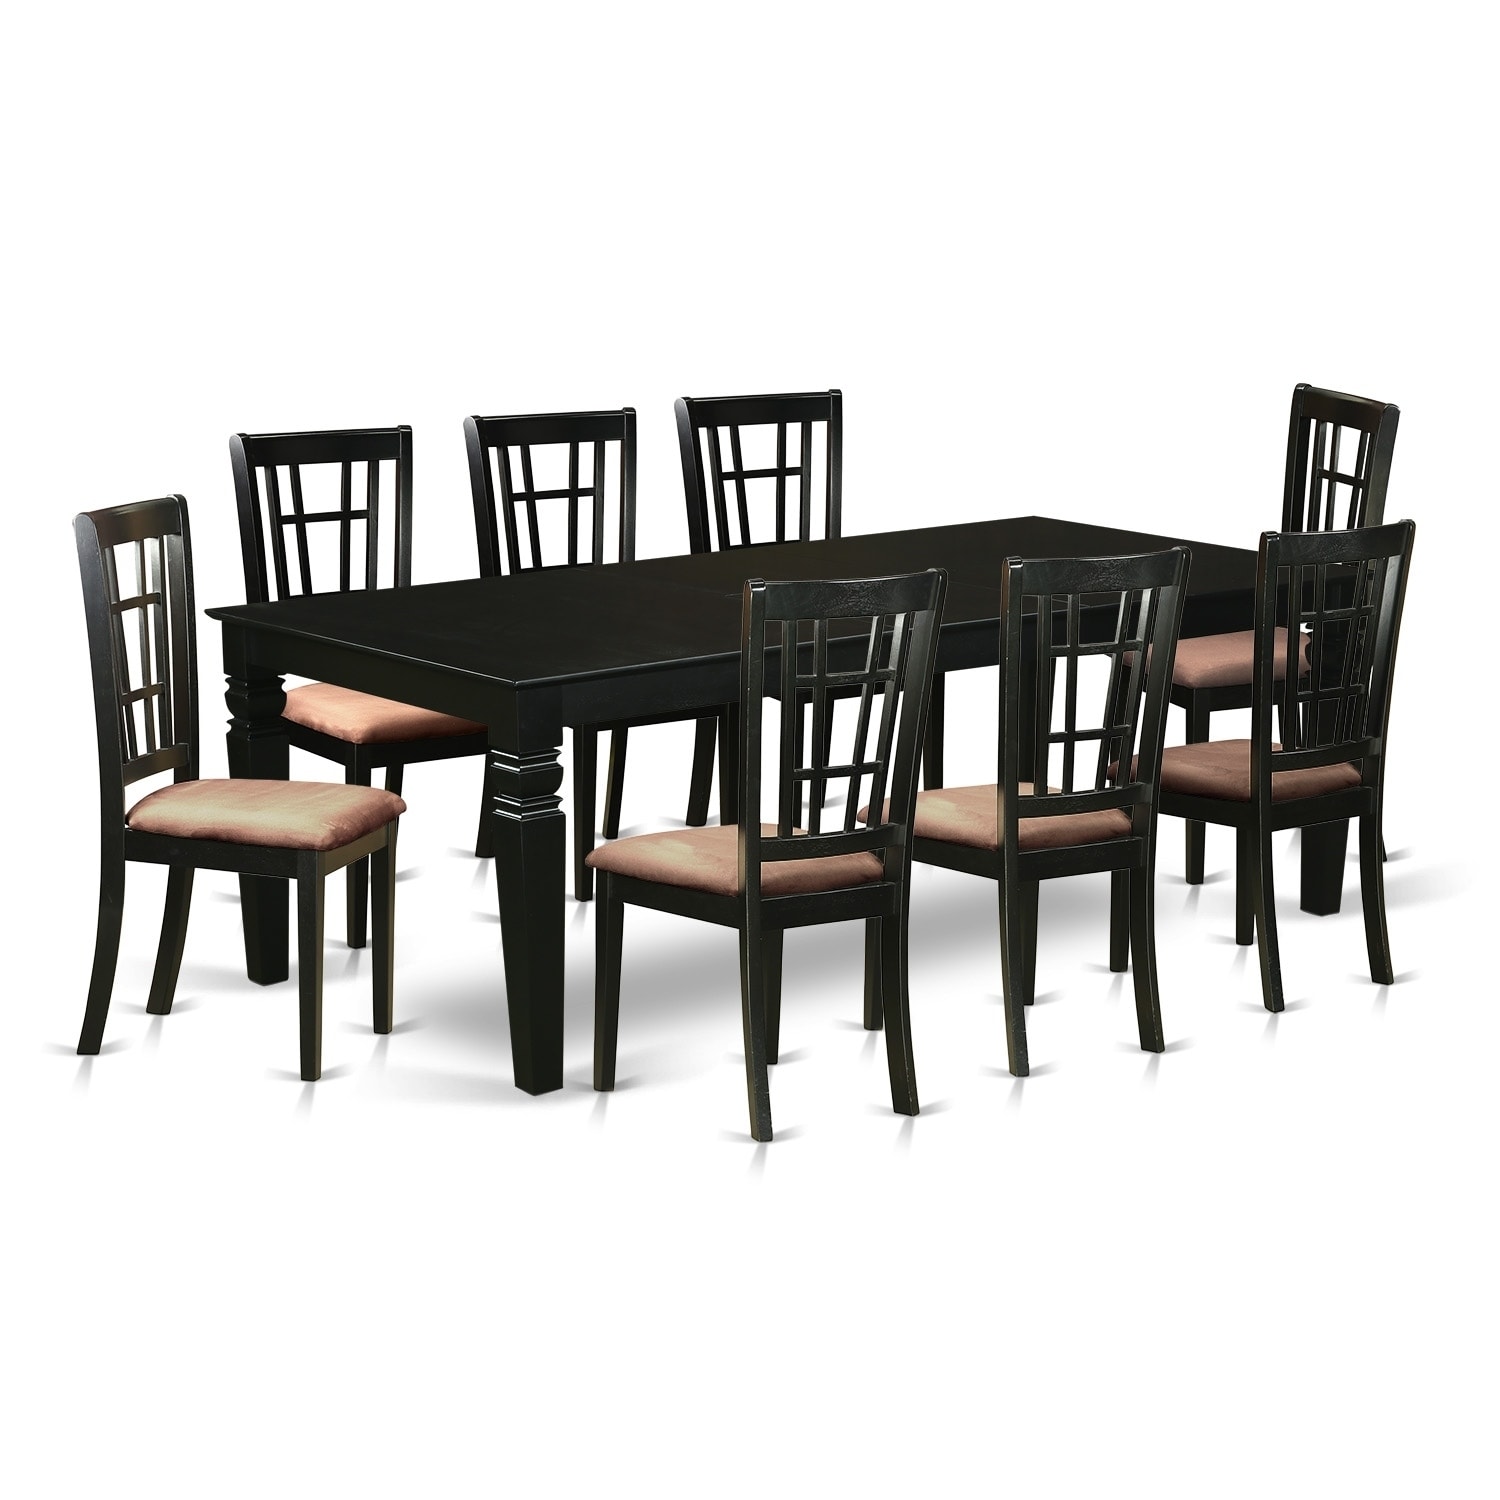 Shop Lgni9 Blk 9 Pc Dining Room Set With A Table And 8 Dining